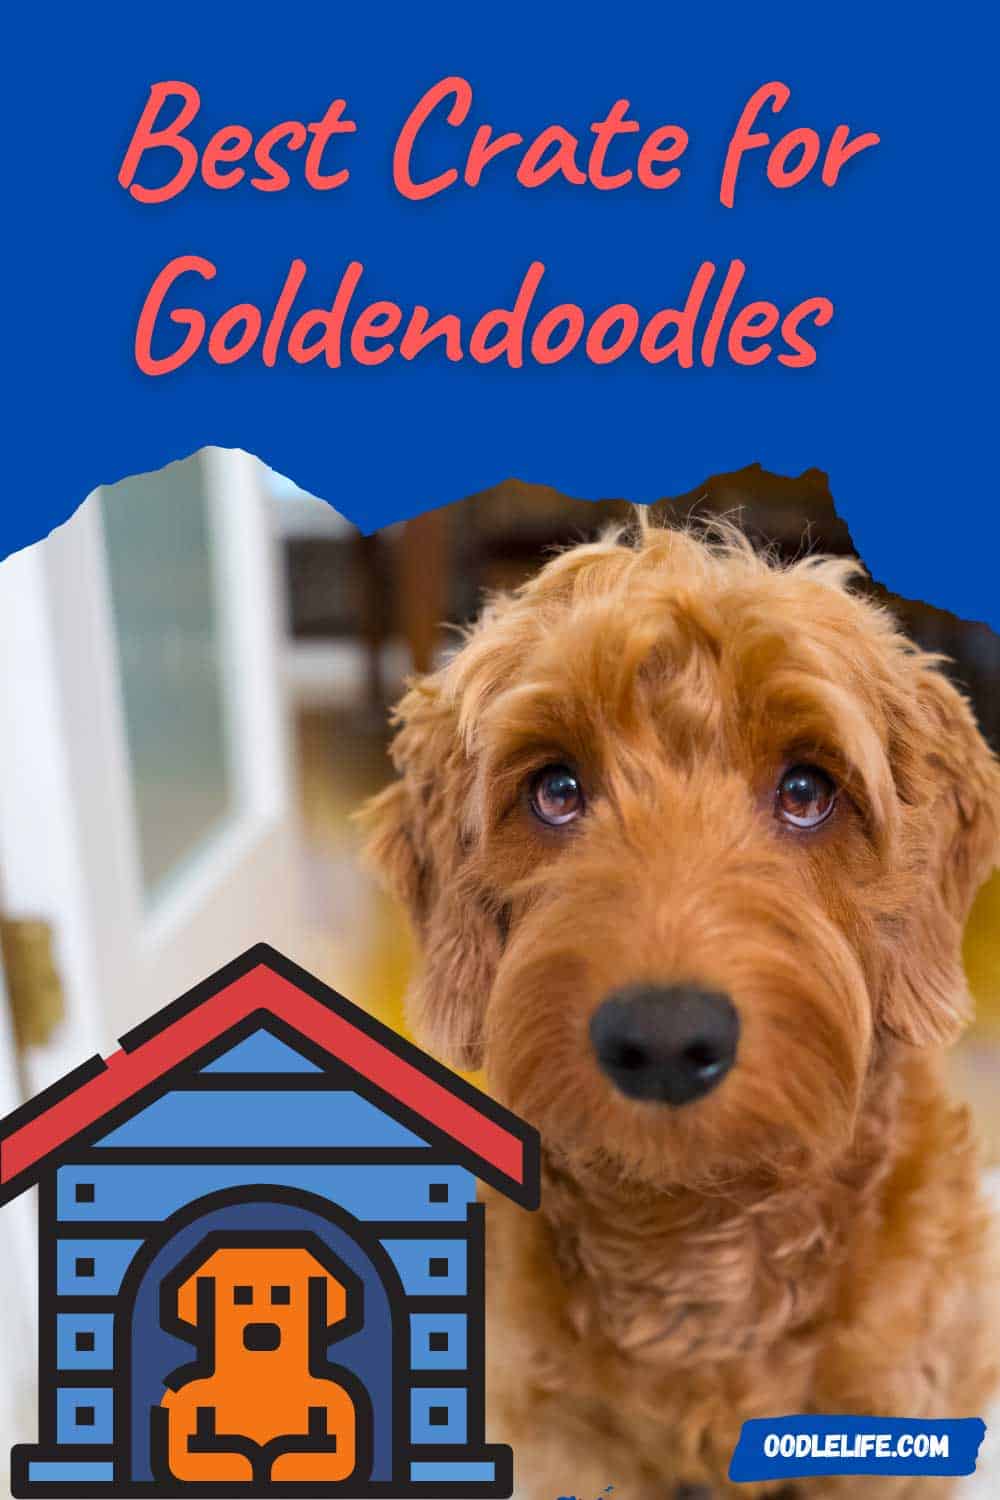 5 Best Dog Crates For A Goldendoodle (Reviews) - Oodle Life